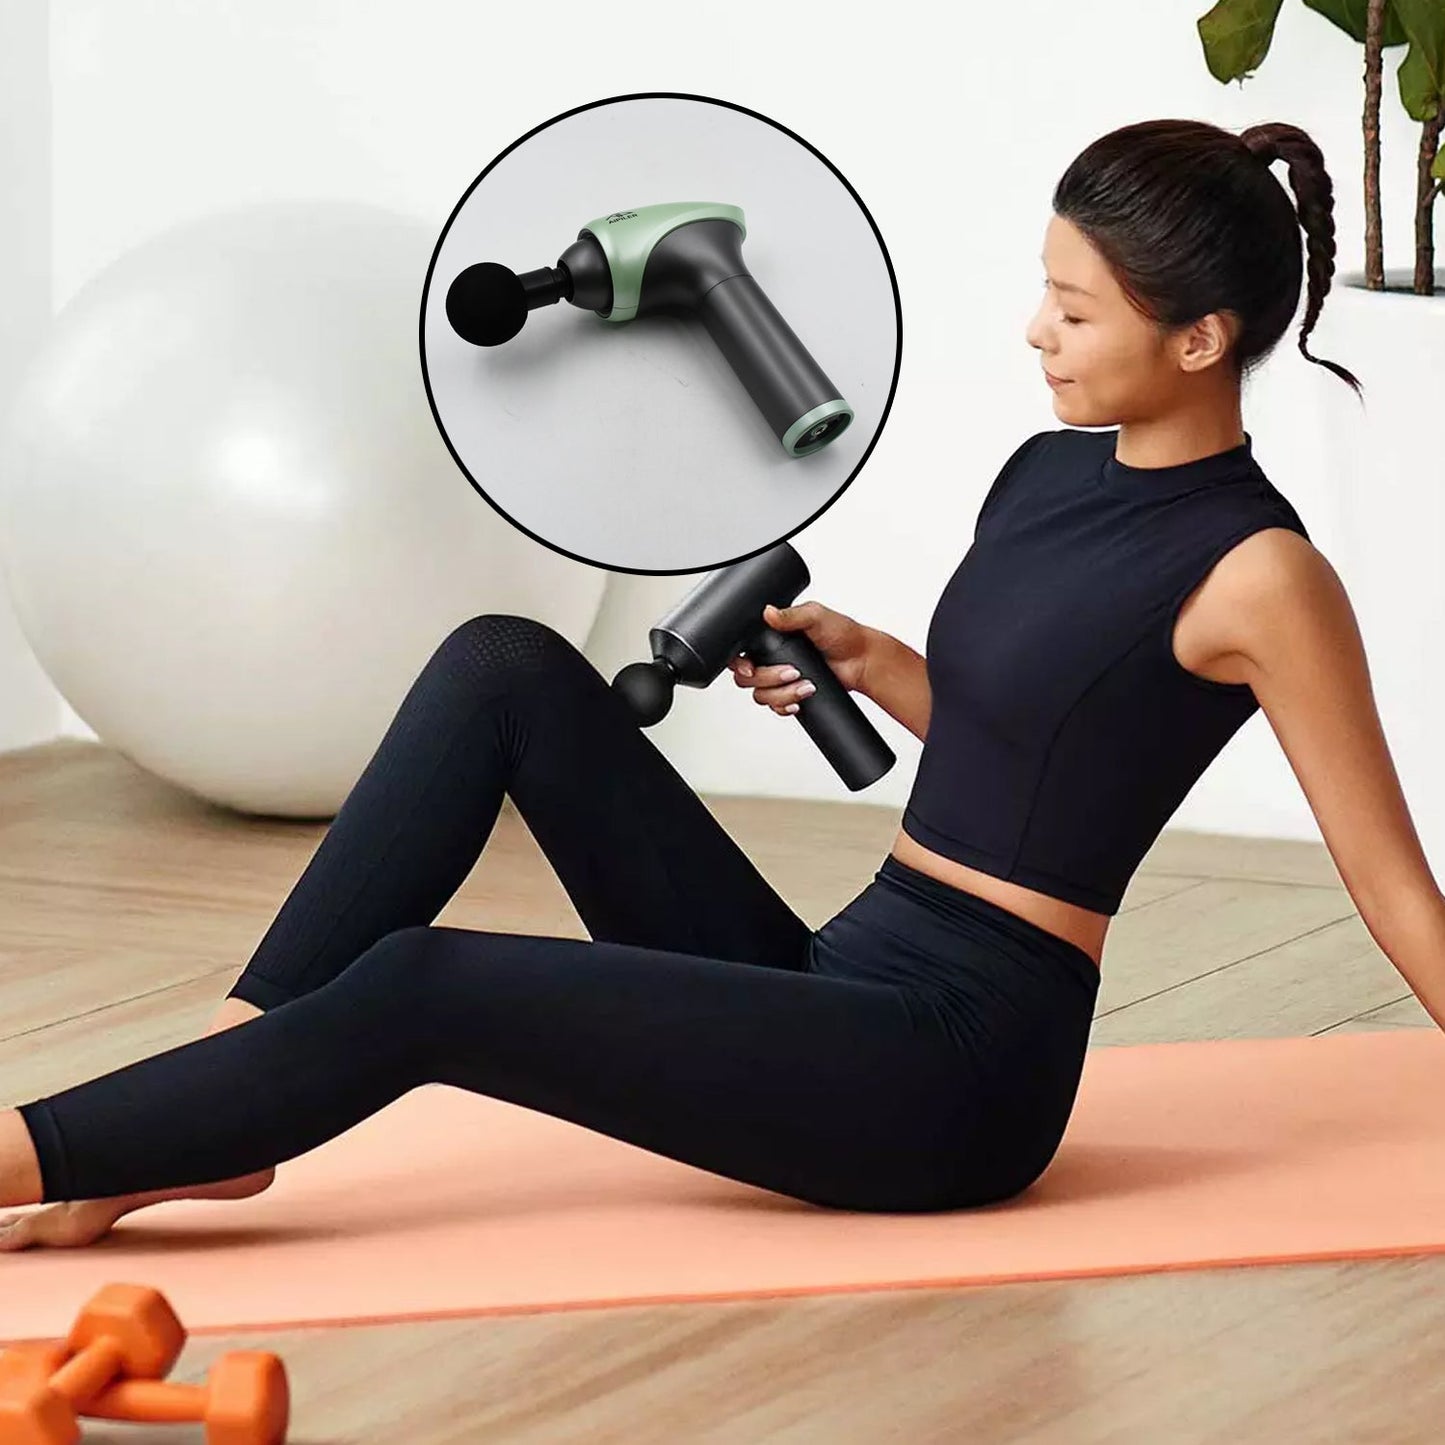 6976 Massage Gun, Includes Suitcase, Box and Stress Ball, Sport and Relax Massage Device, Small, Powerful and Quiet, Massage Gun for Pain Relief Super Quiet Electric Massager, 4 Massage Heads